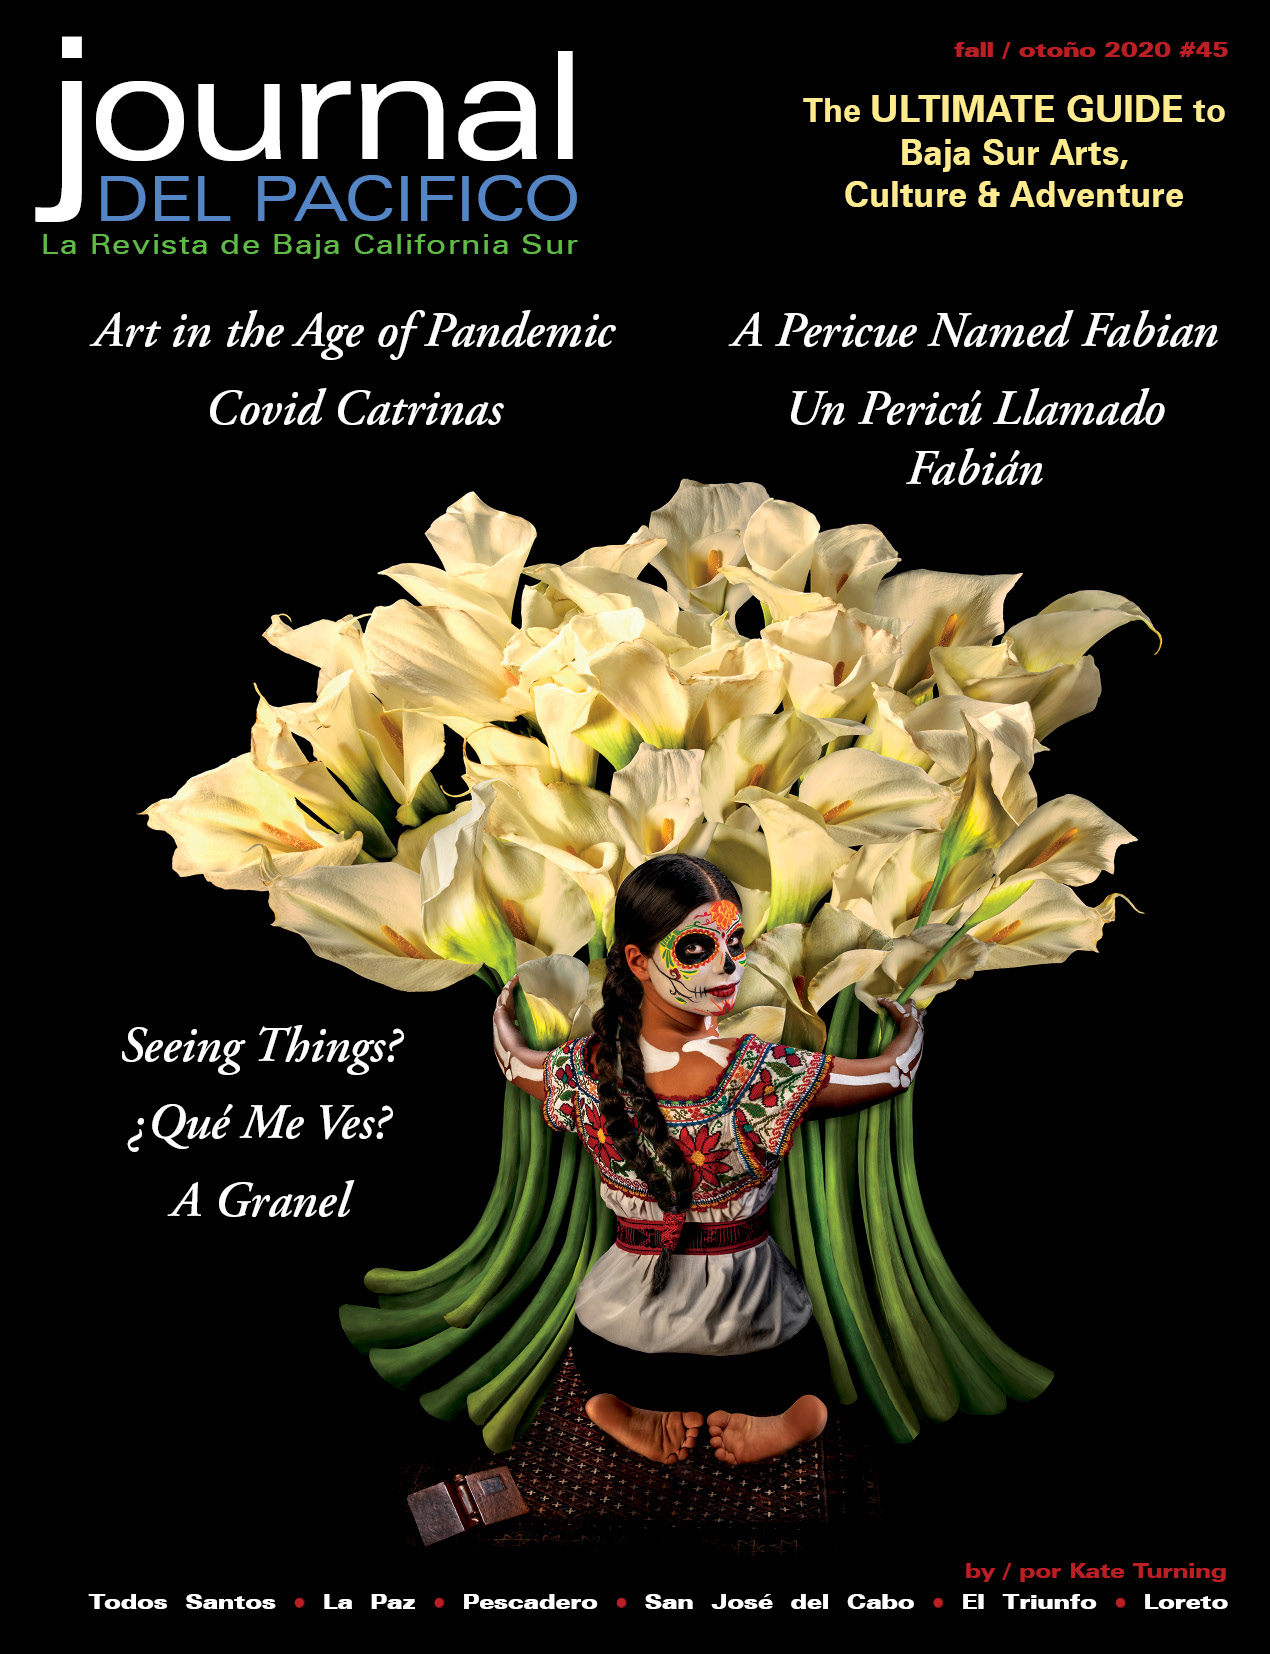 Fall/Otoño 2020 Issue of Journal del Pacifico